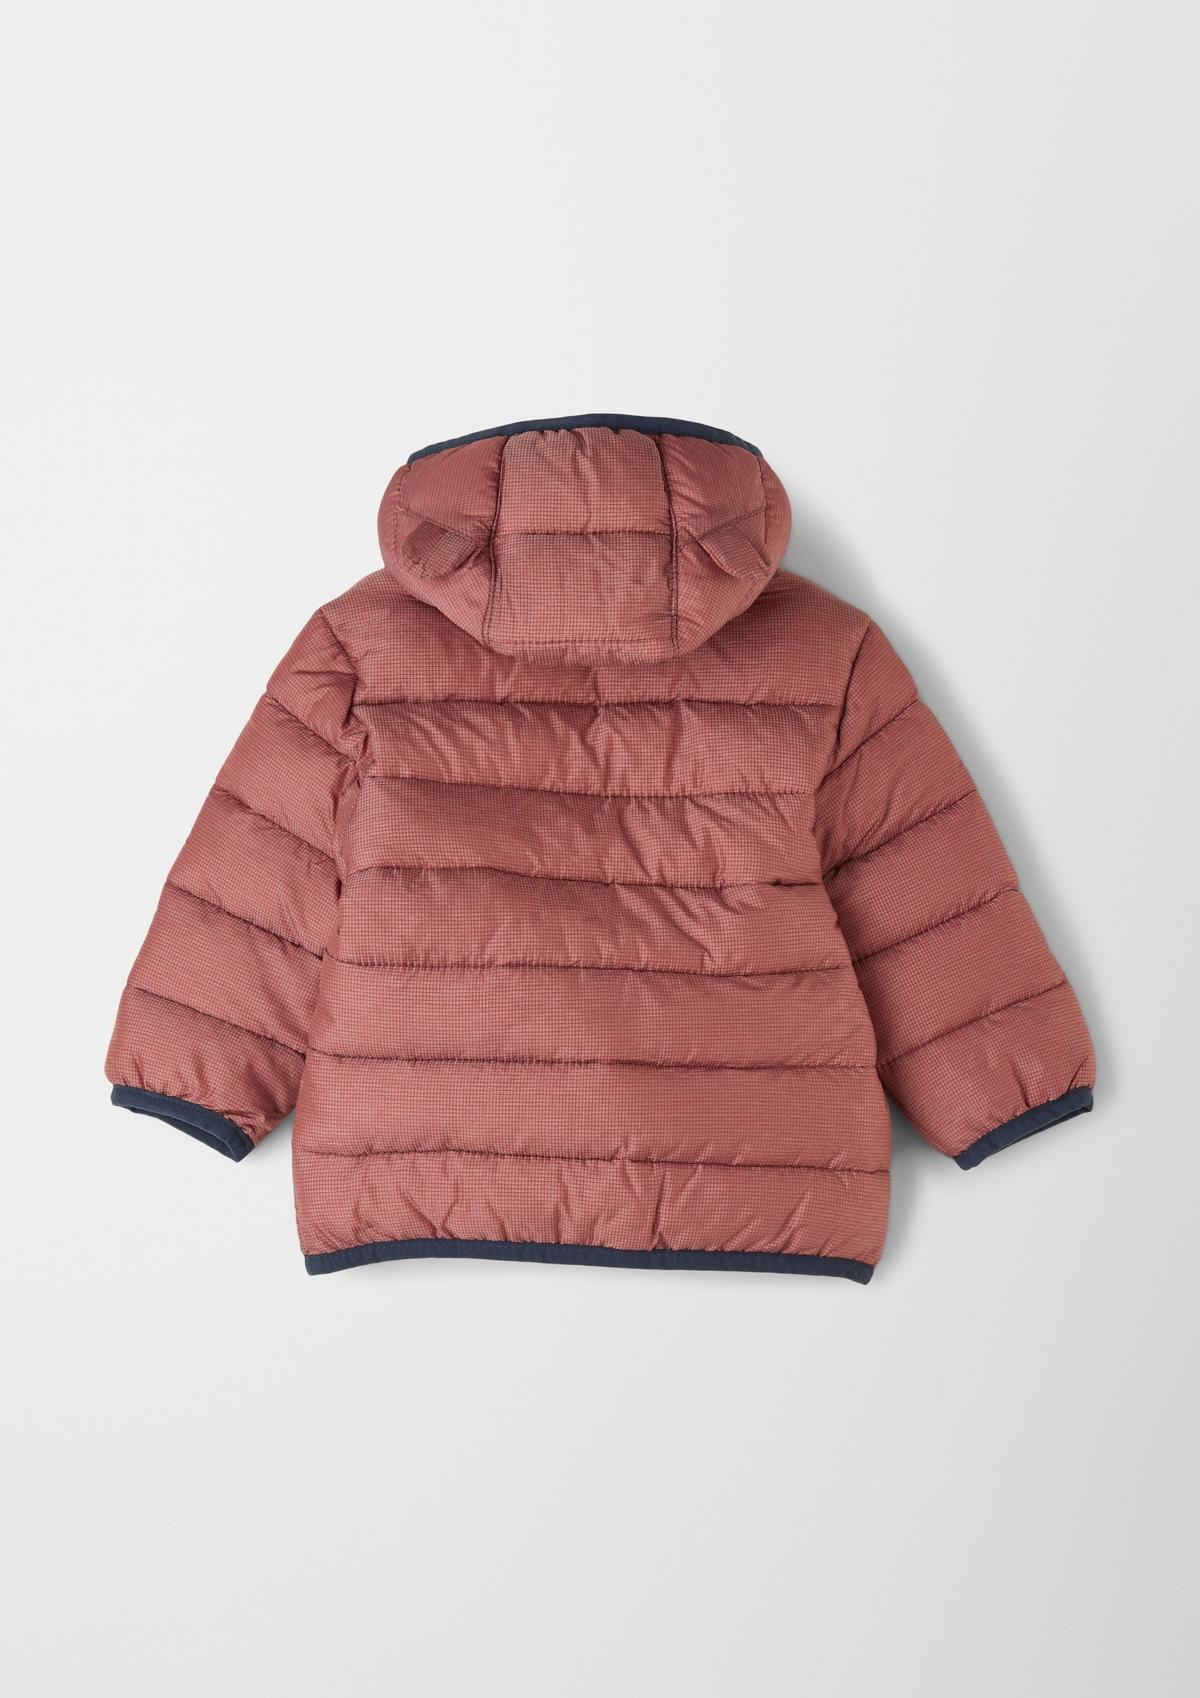 s.Oliver Quilted jacket with little ears on the hood